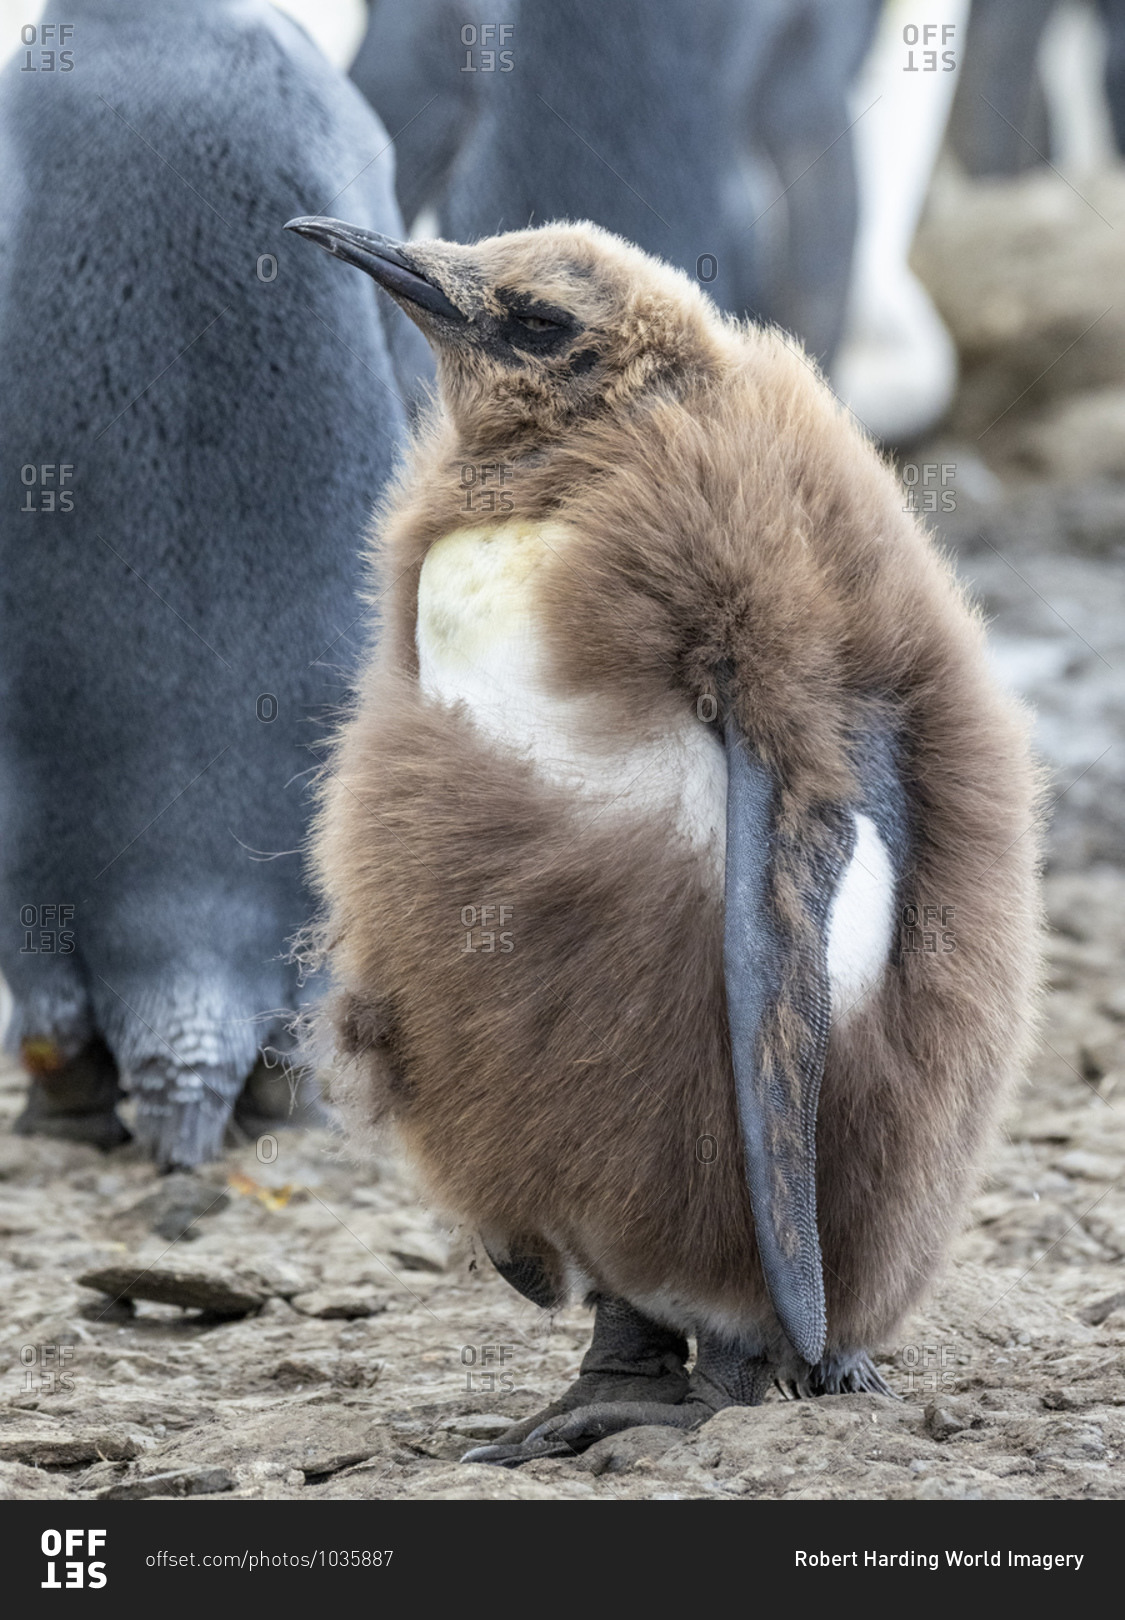 King penguin (Aptenodytes patagonicus) chick molting its downy feathers at Gold Harbor, South Georgia, Polar Regions